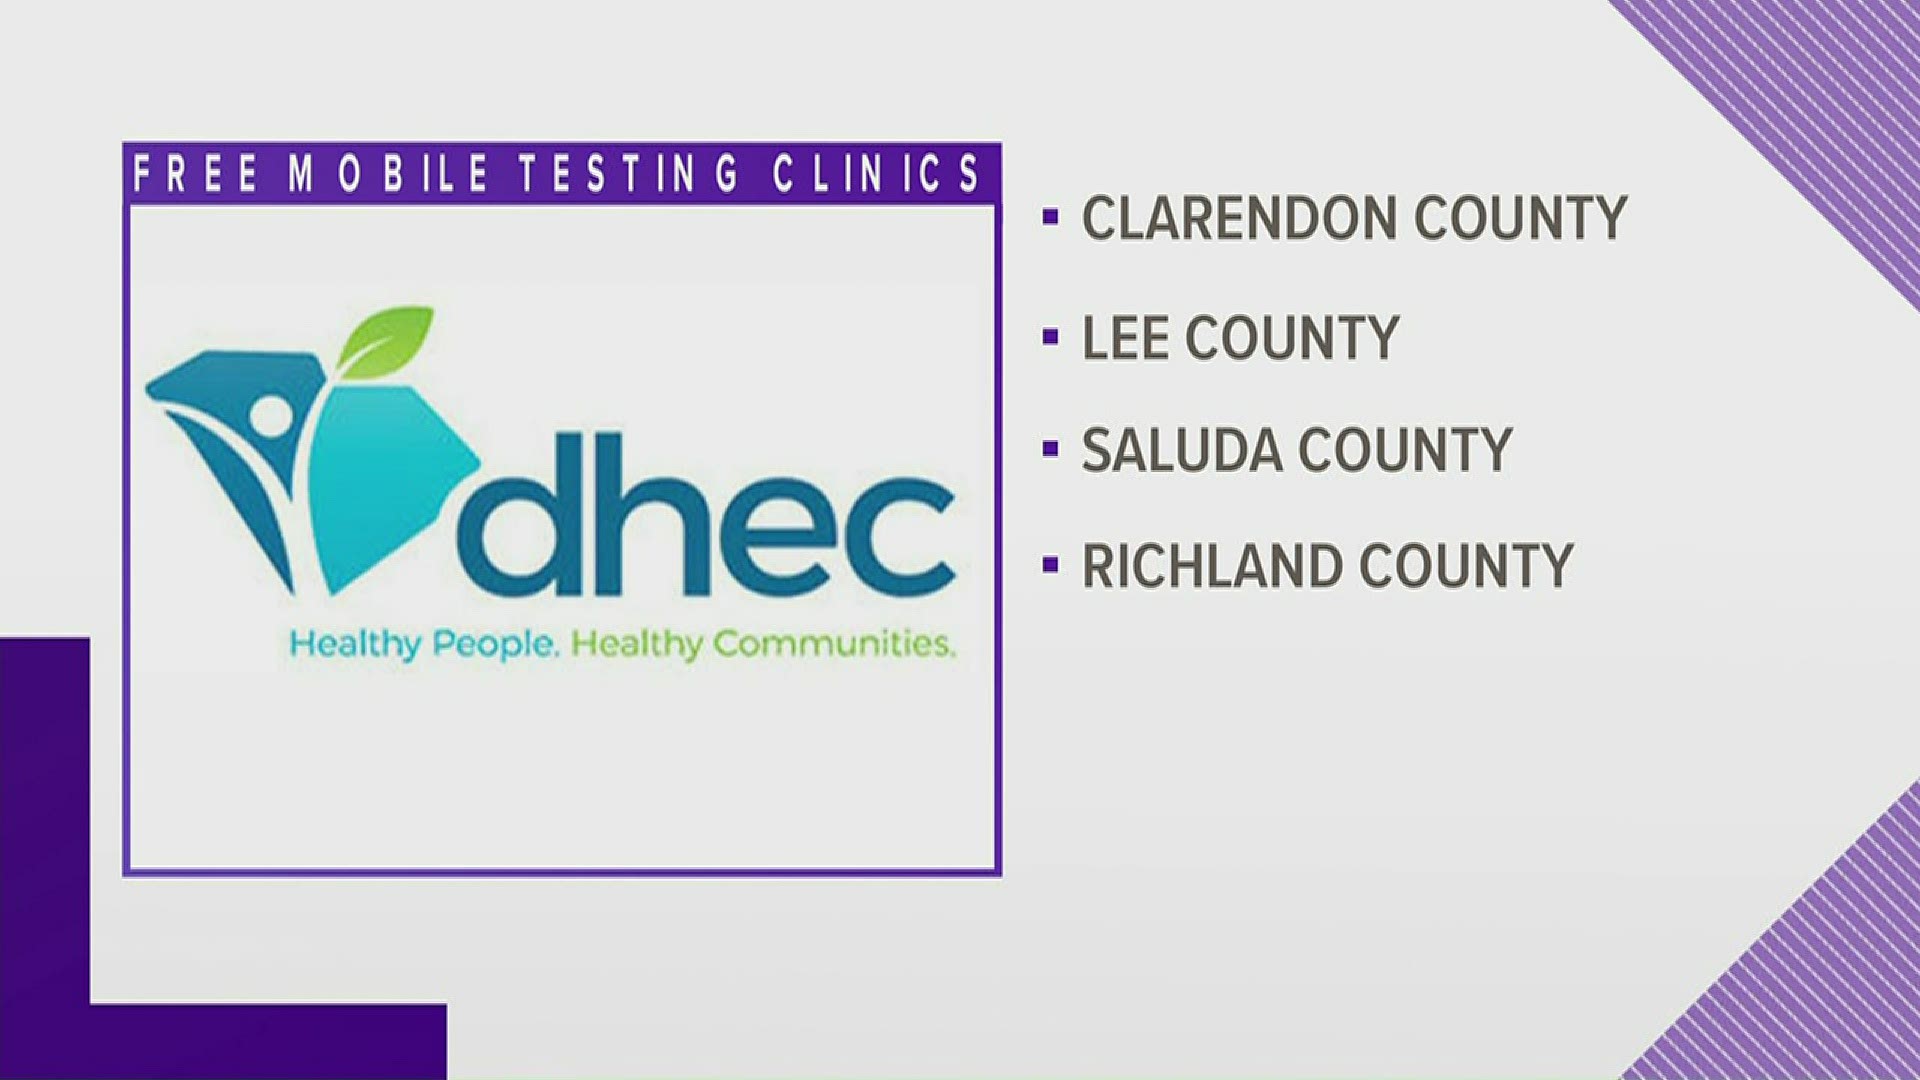 Check DHEC's mobile testing clinic webpage to find out where and when free testing is available near you.